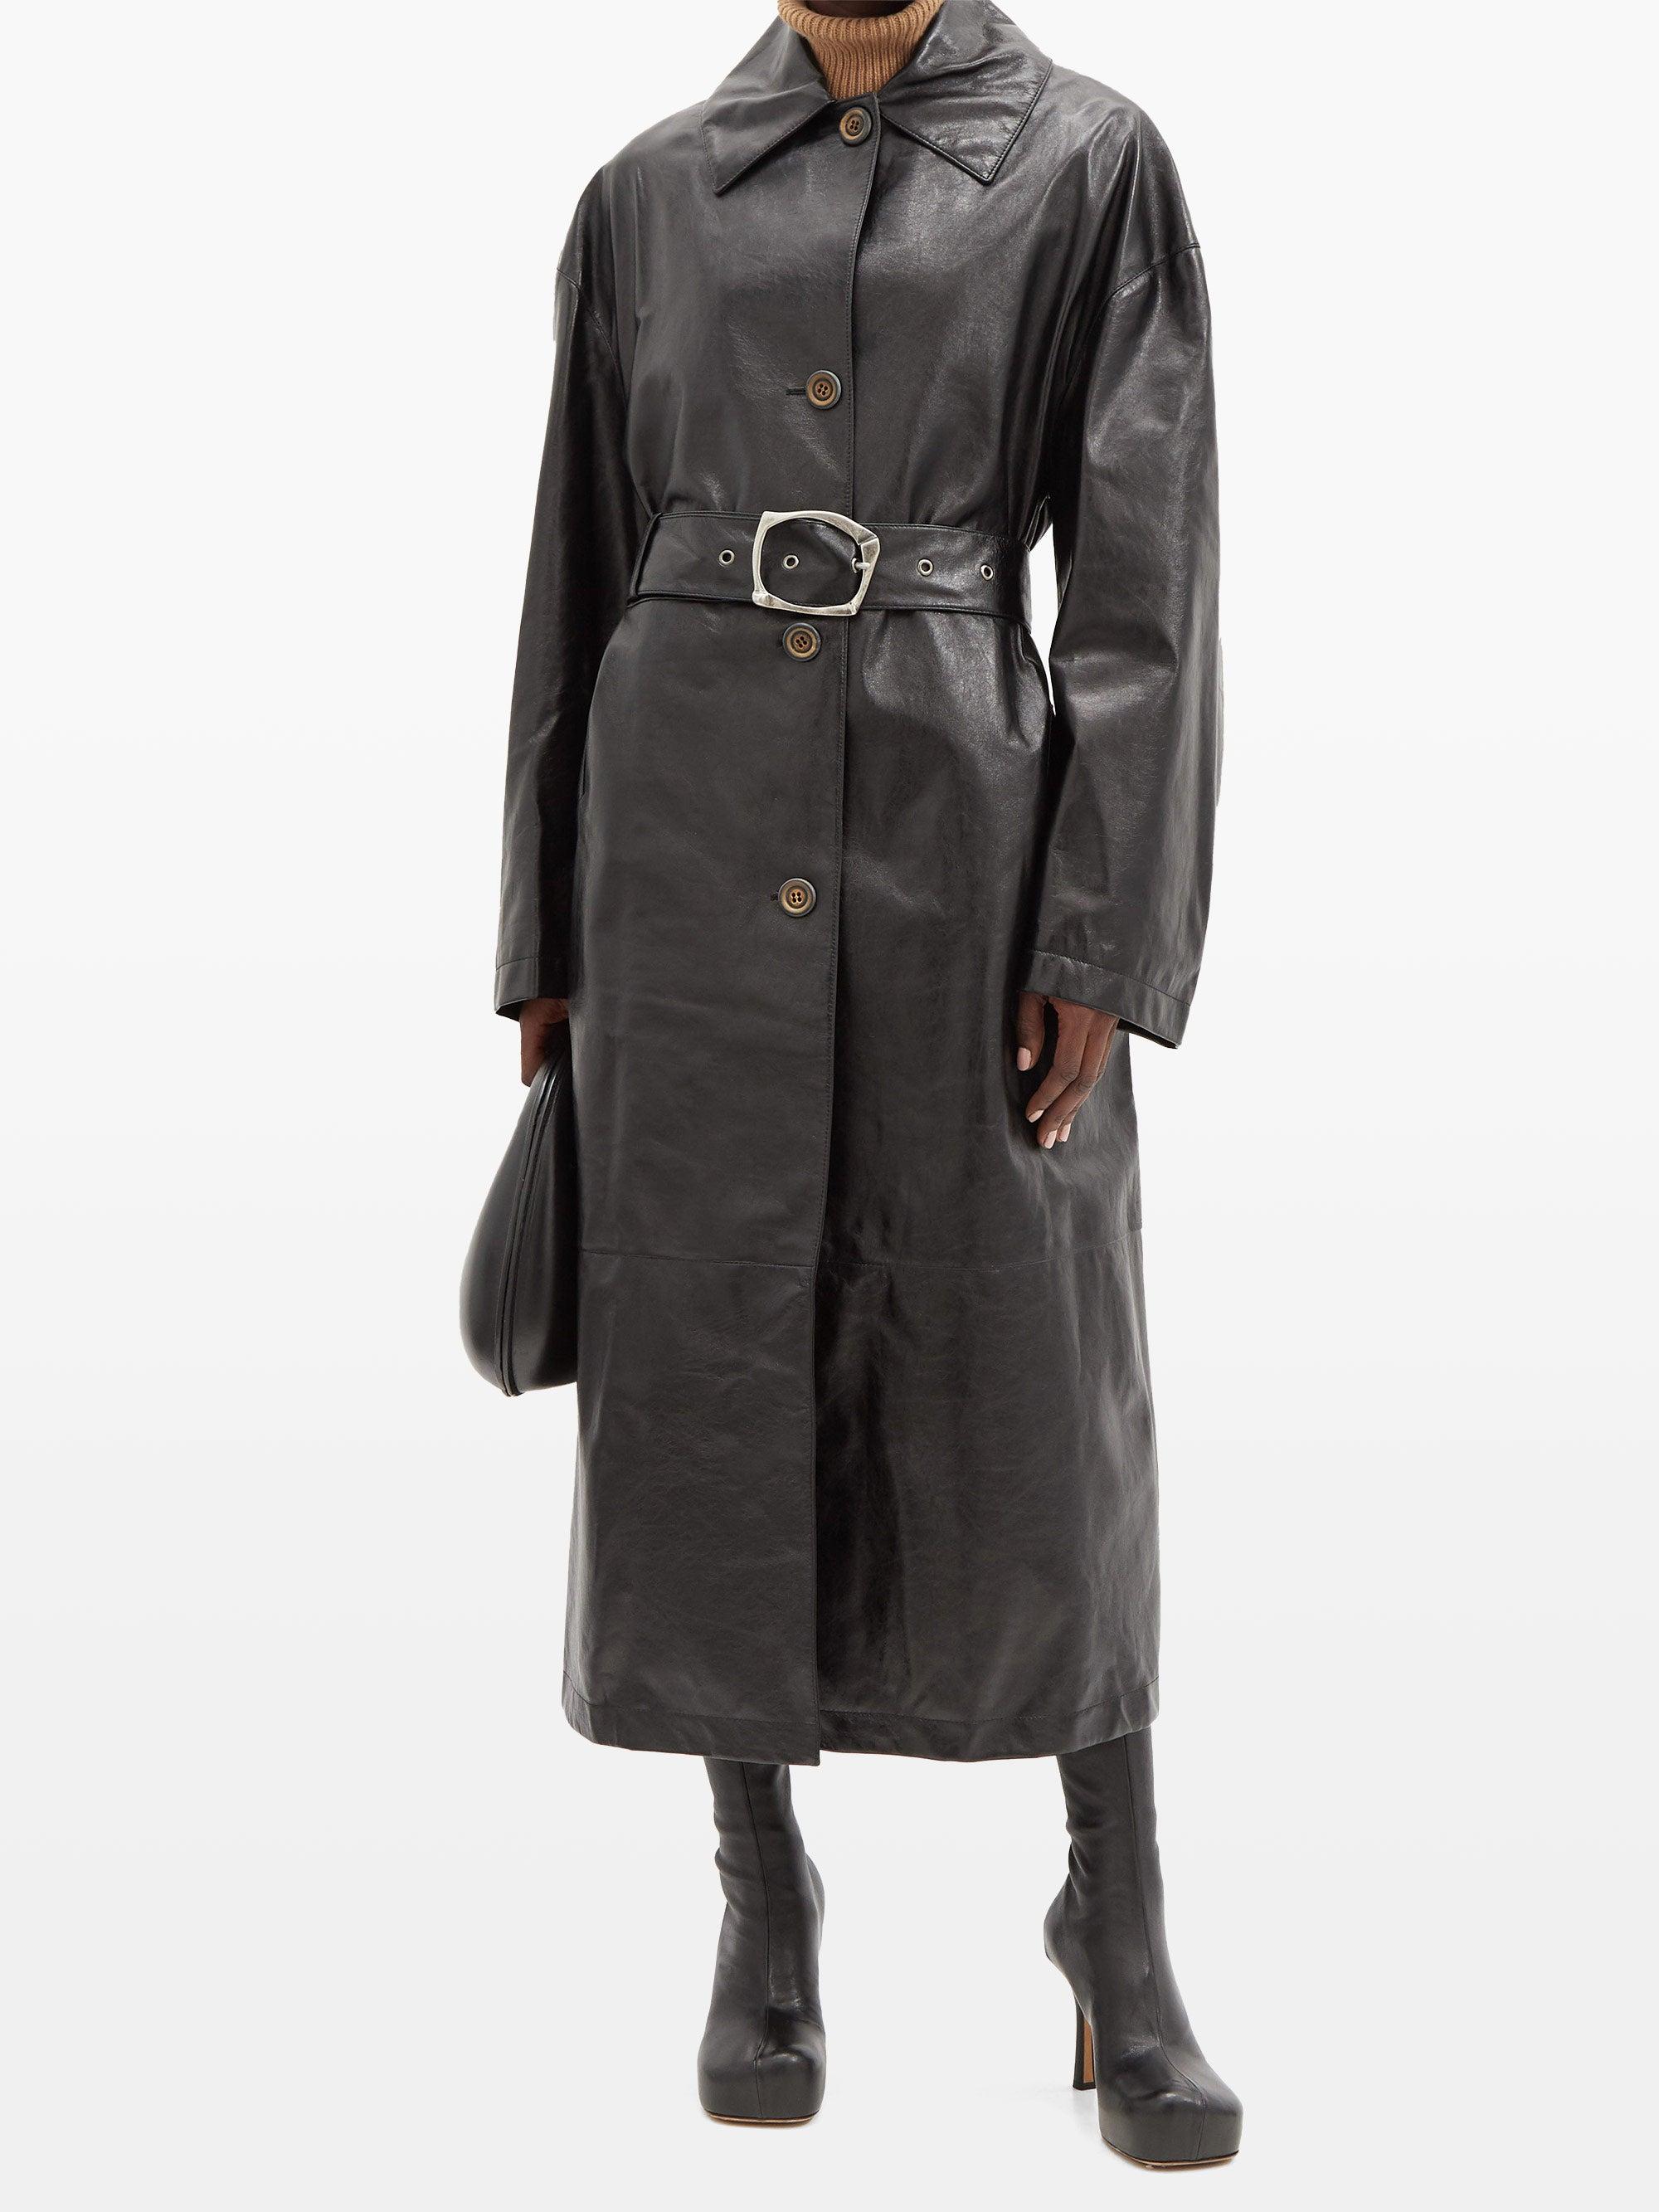 Marni Belted Leather Trench Coat in Black - Lyst